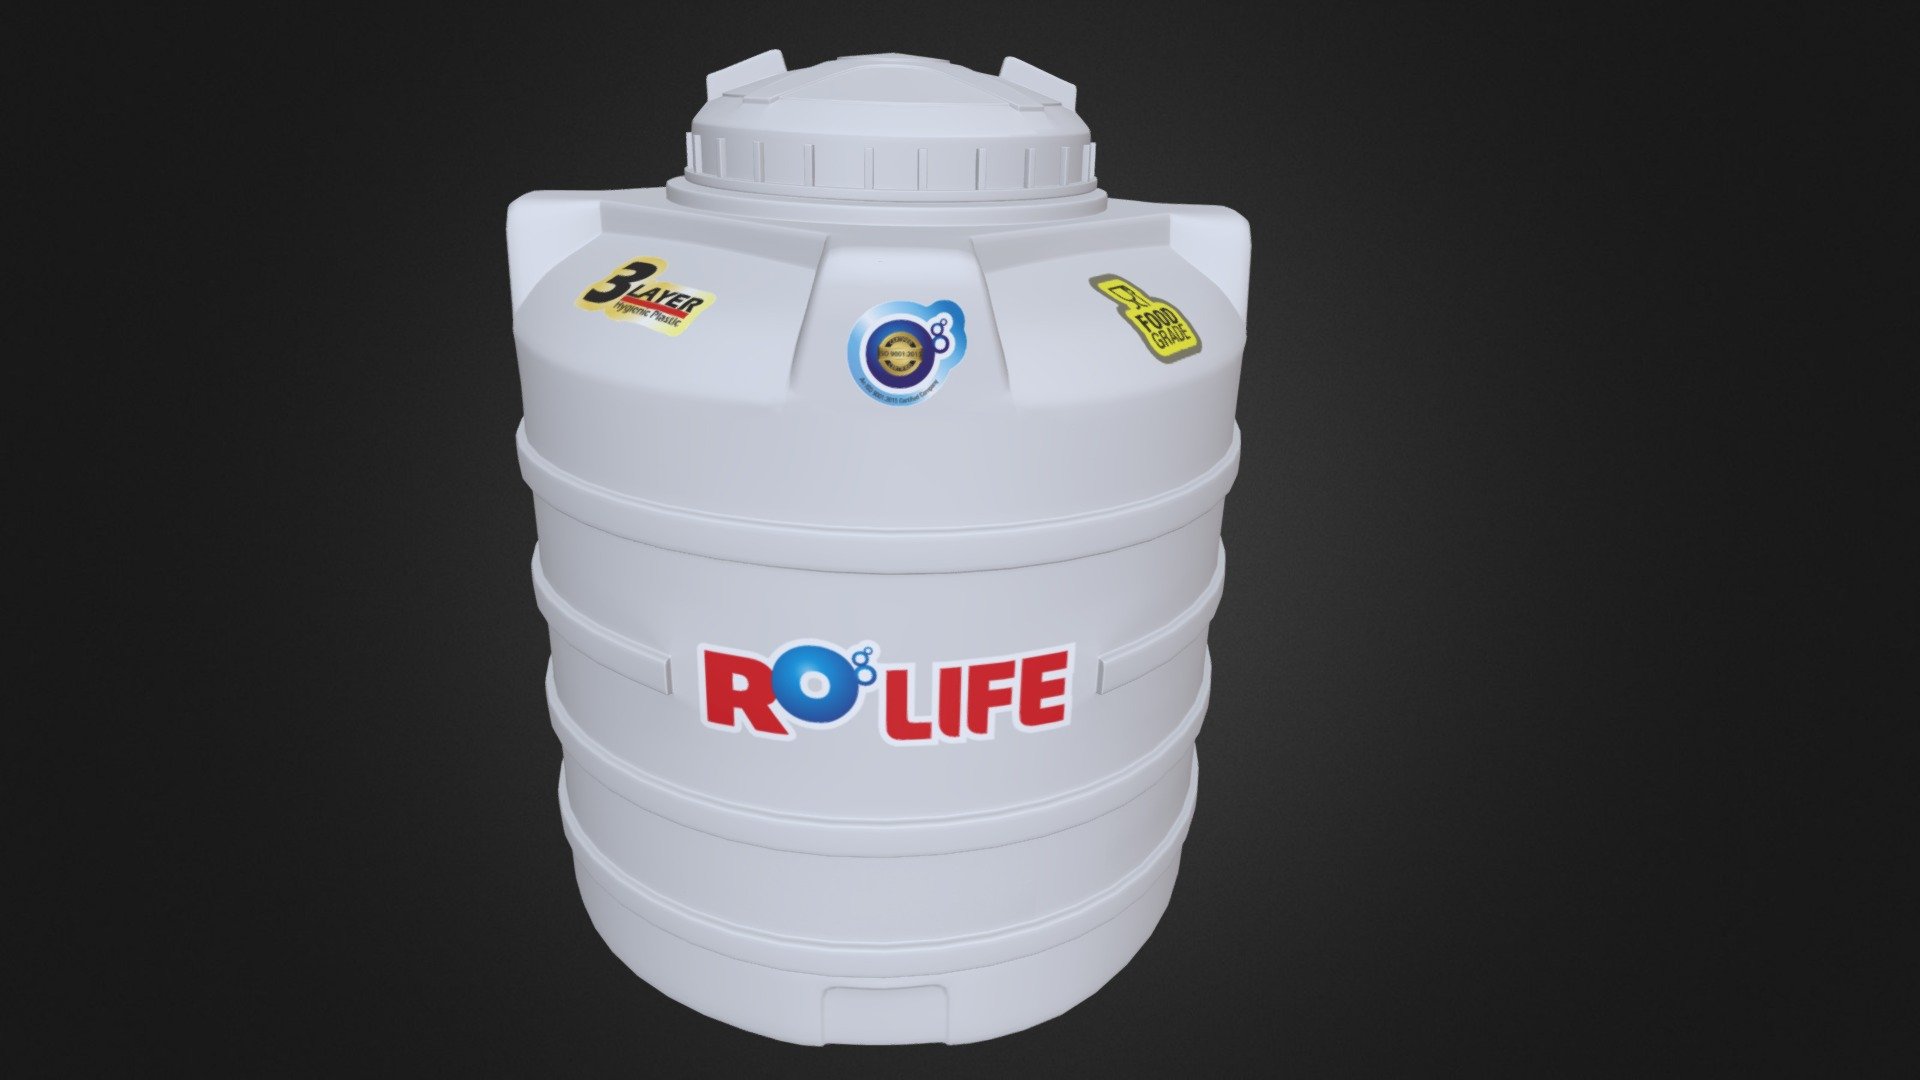 Three and Four layer Ro life water tanks are the most recent advancement in the field of water storage facilities. The outermost layer with heat reflective technology helps in maintaining cool water. The tanks are also very thick, strong and durable 3d model